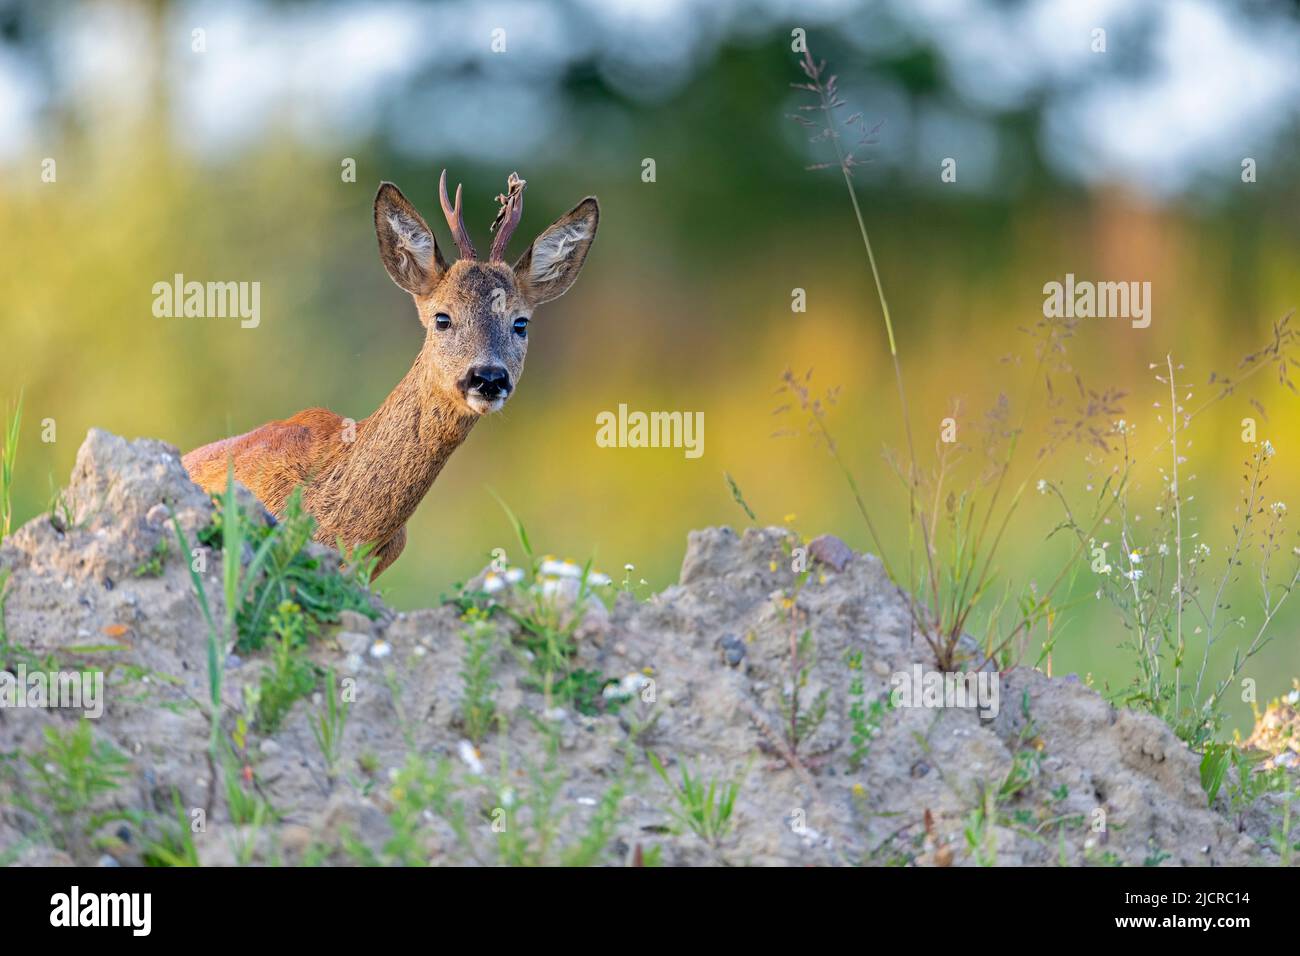 Western Roe Deer (Capreolus capreolus). Curious roebuck looks over a mound of earth. Germany Stock Photo